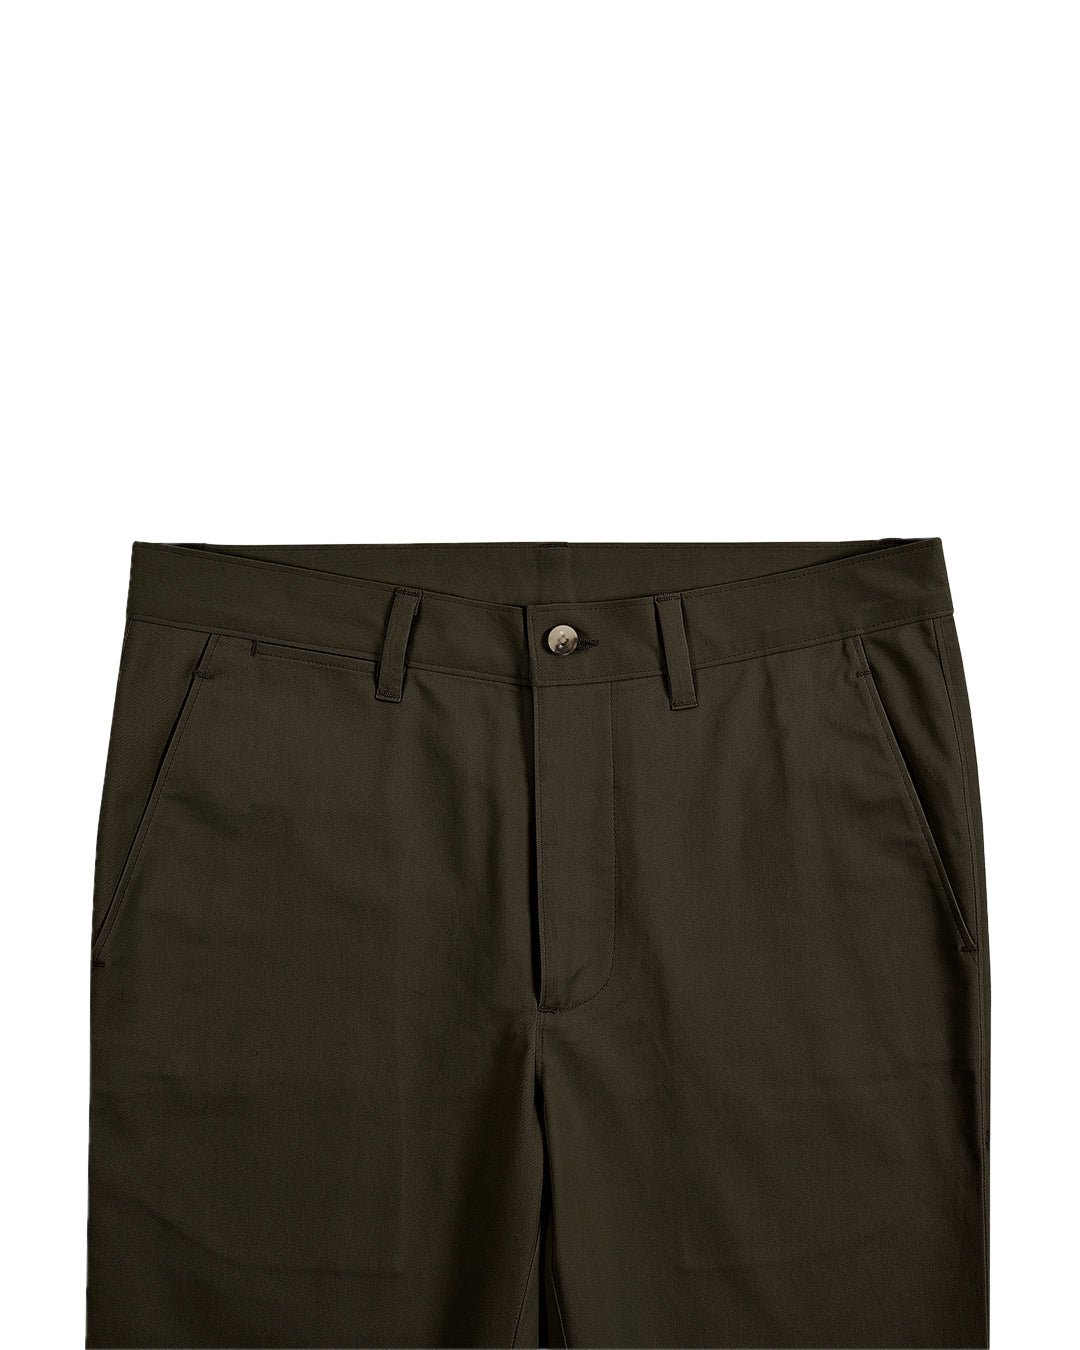 Front view of custom Genoa Chino pants for men by Luxire in brown